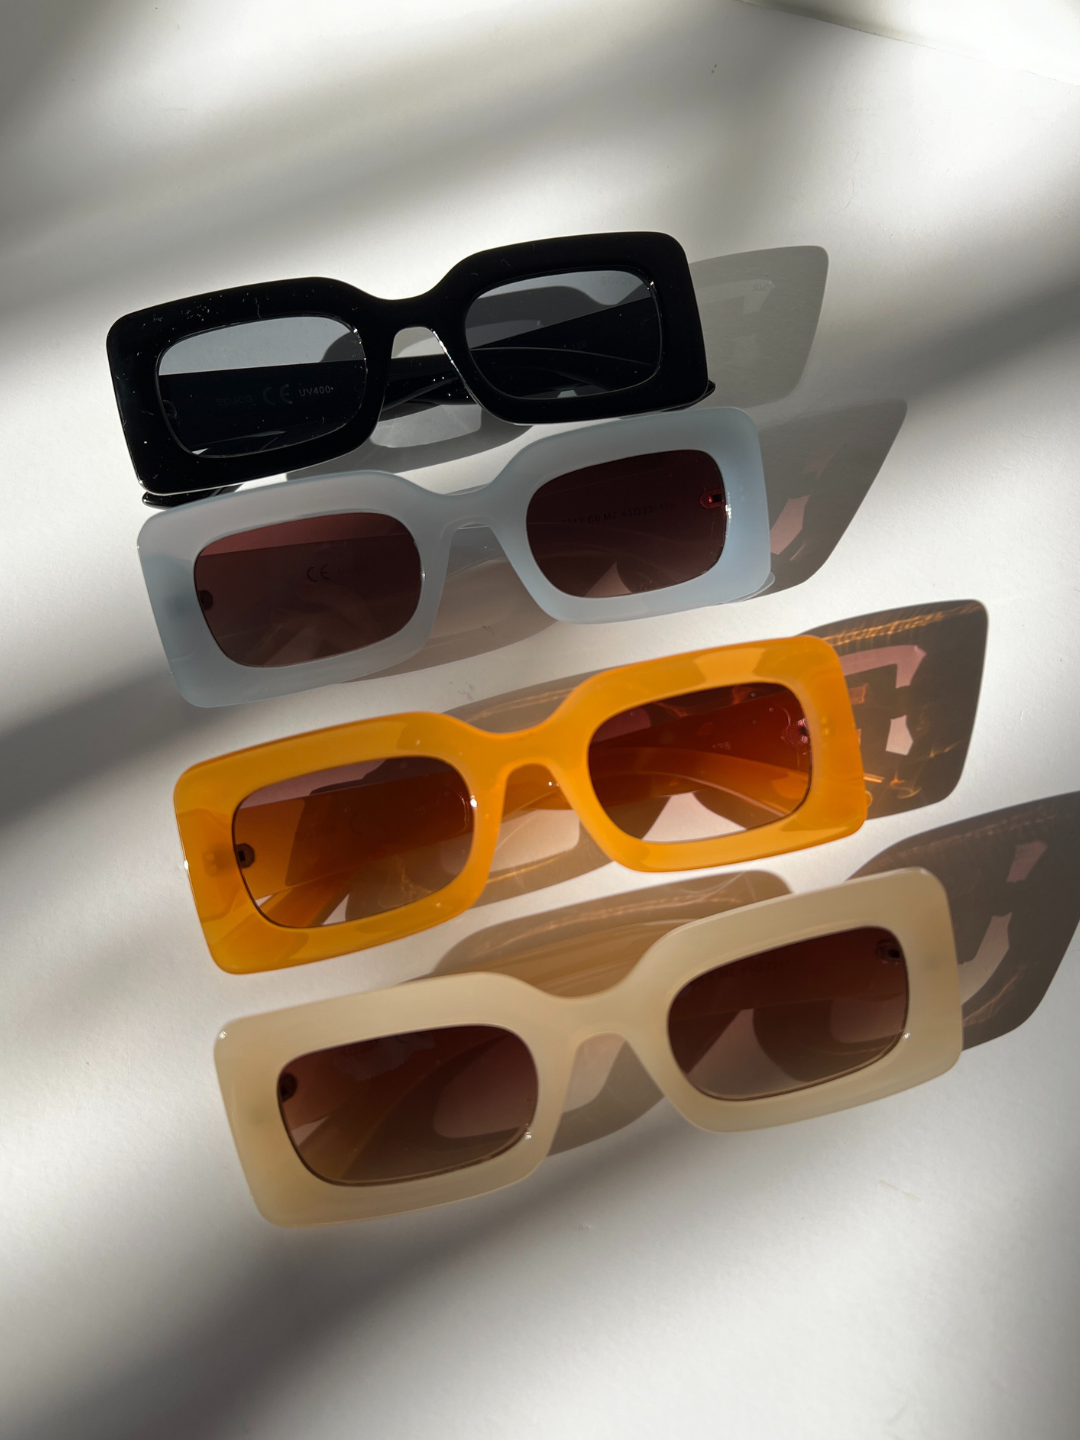 Black | Group of kids rectangle sunglasses in black, blue, orange and cream, lined up diagonally on a white background.